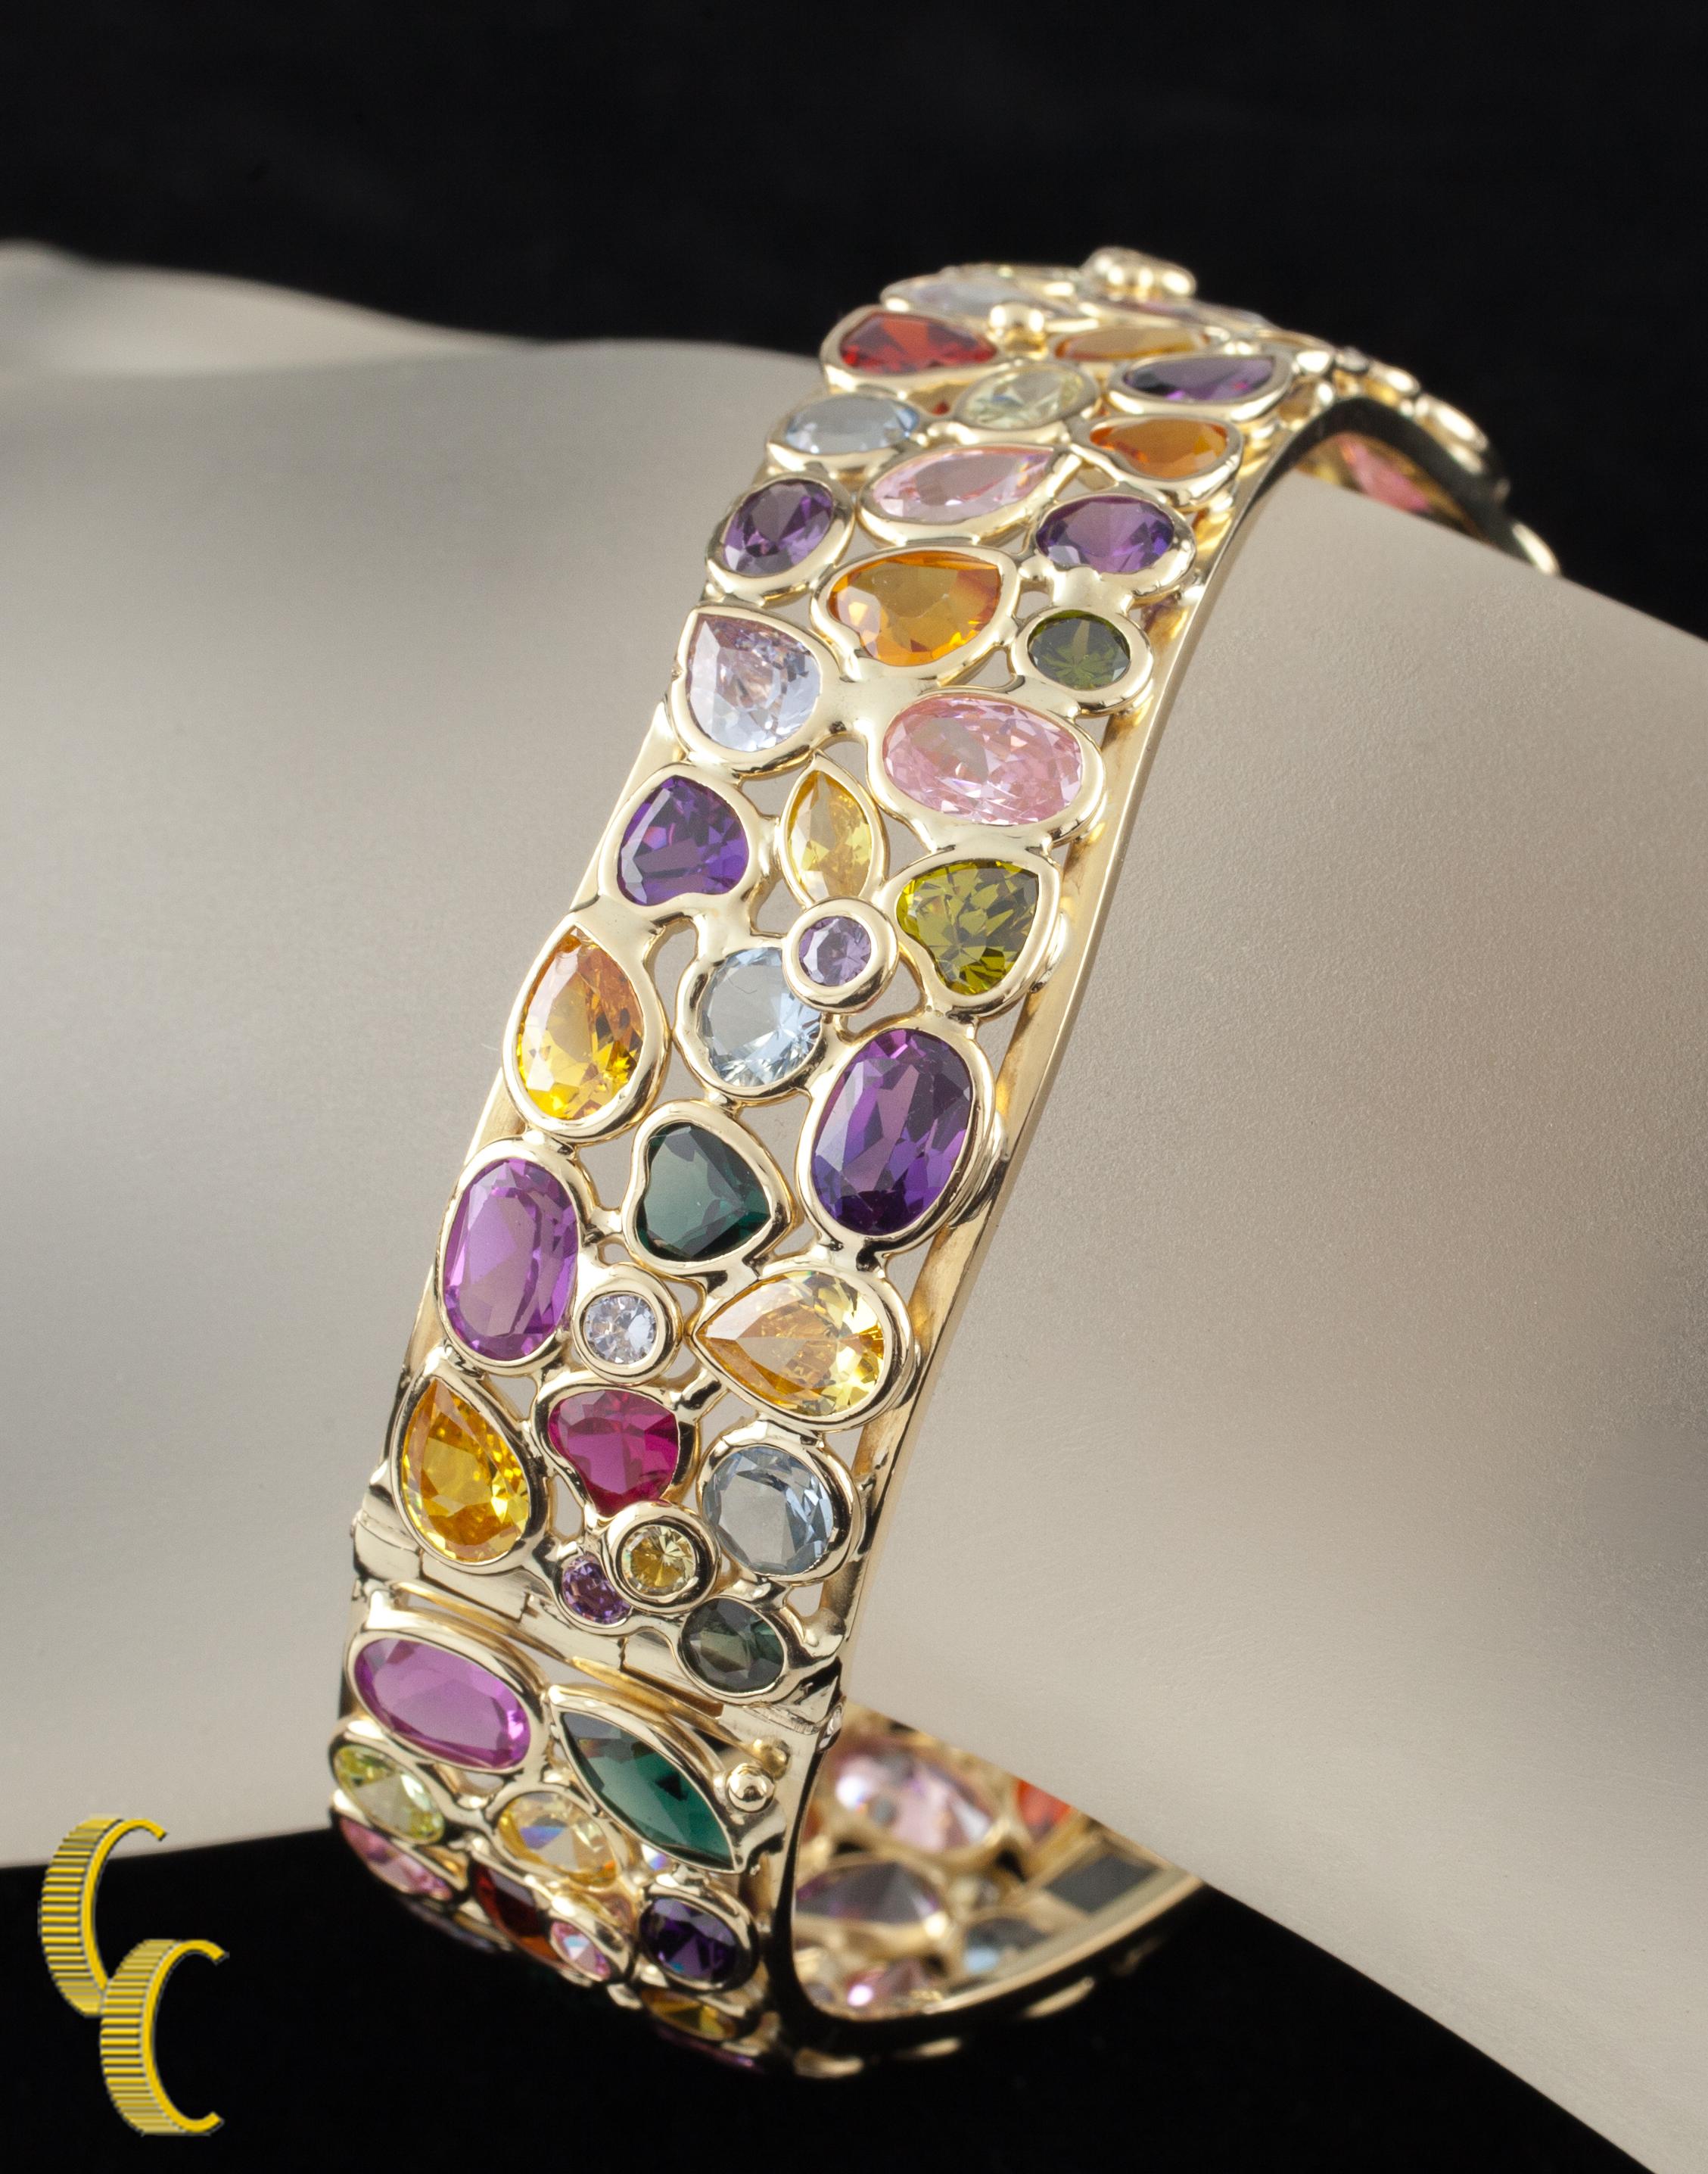 Features Custom Bezel Settings for Each Stone
Various Colored Gemstones in Marquise, Round, Heart, Oval, and Square Cut Varieties
Bangle Features Slight Wave Design
Approximate Width of Bangle = 17 mm
Inner Circumference (Wrist Fit) = Approximately